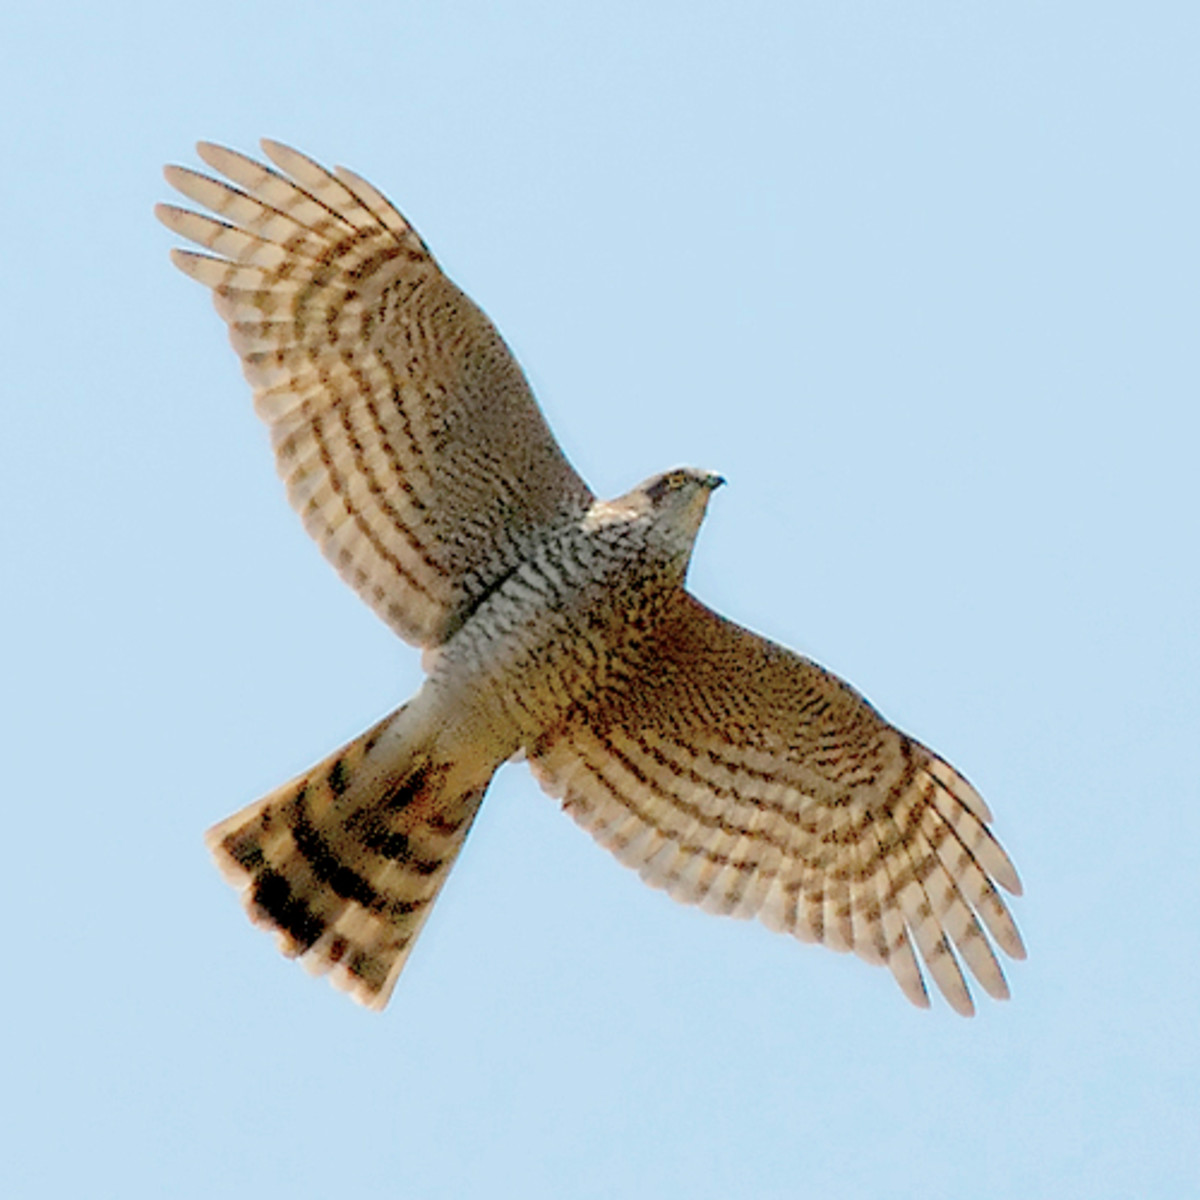 Sparrow Hawk soaring, showing barring on under feathers